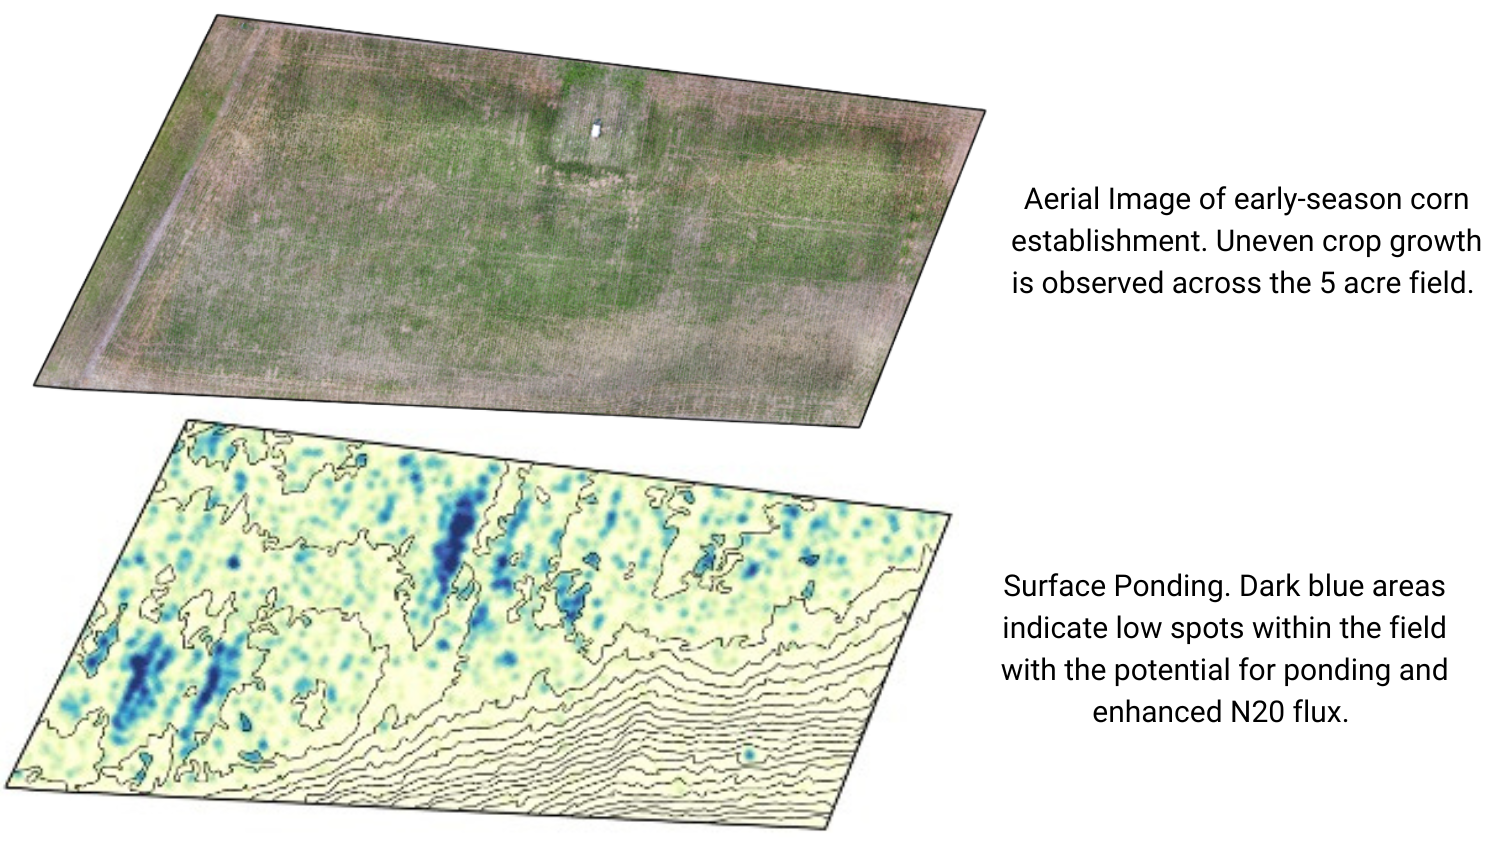 UAV map comparison of crop establishment and ponding for potential N2O release